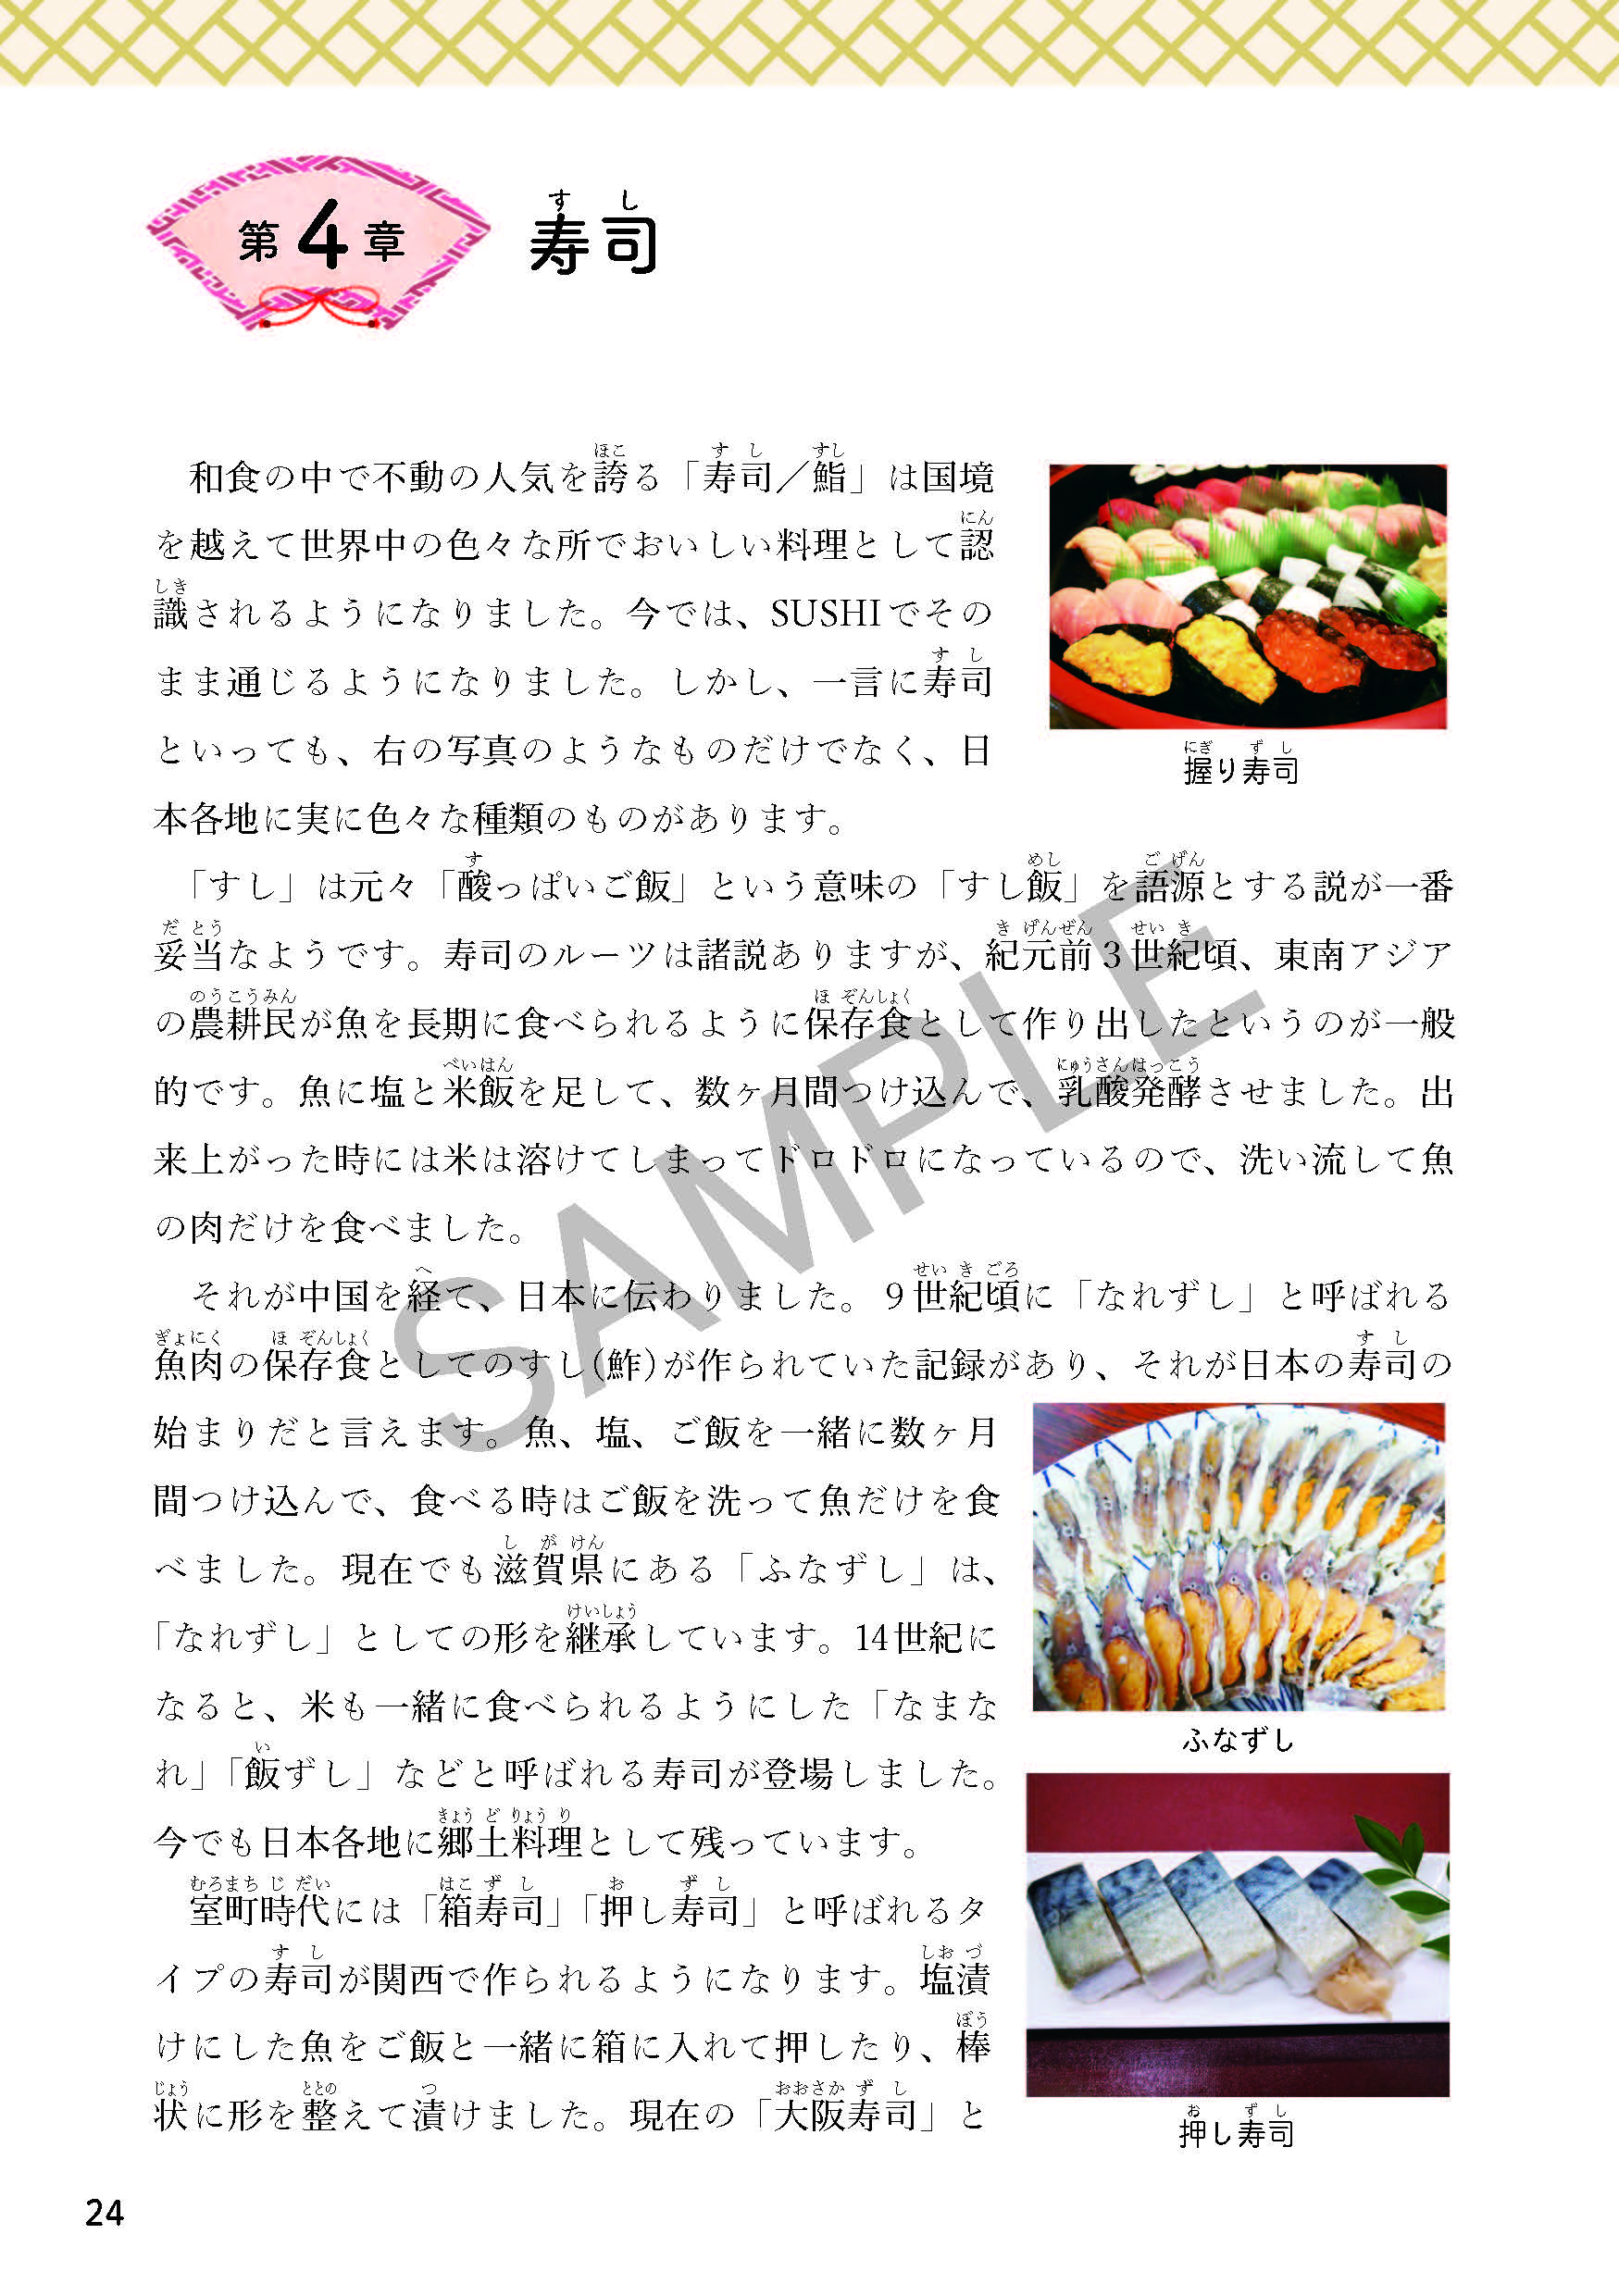 Meshiagare - A Culinary Journey Through Advanced Japanese - Sample Page 8